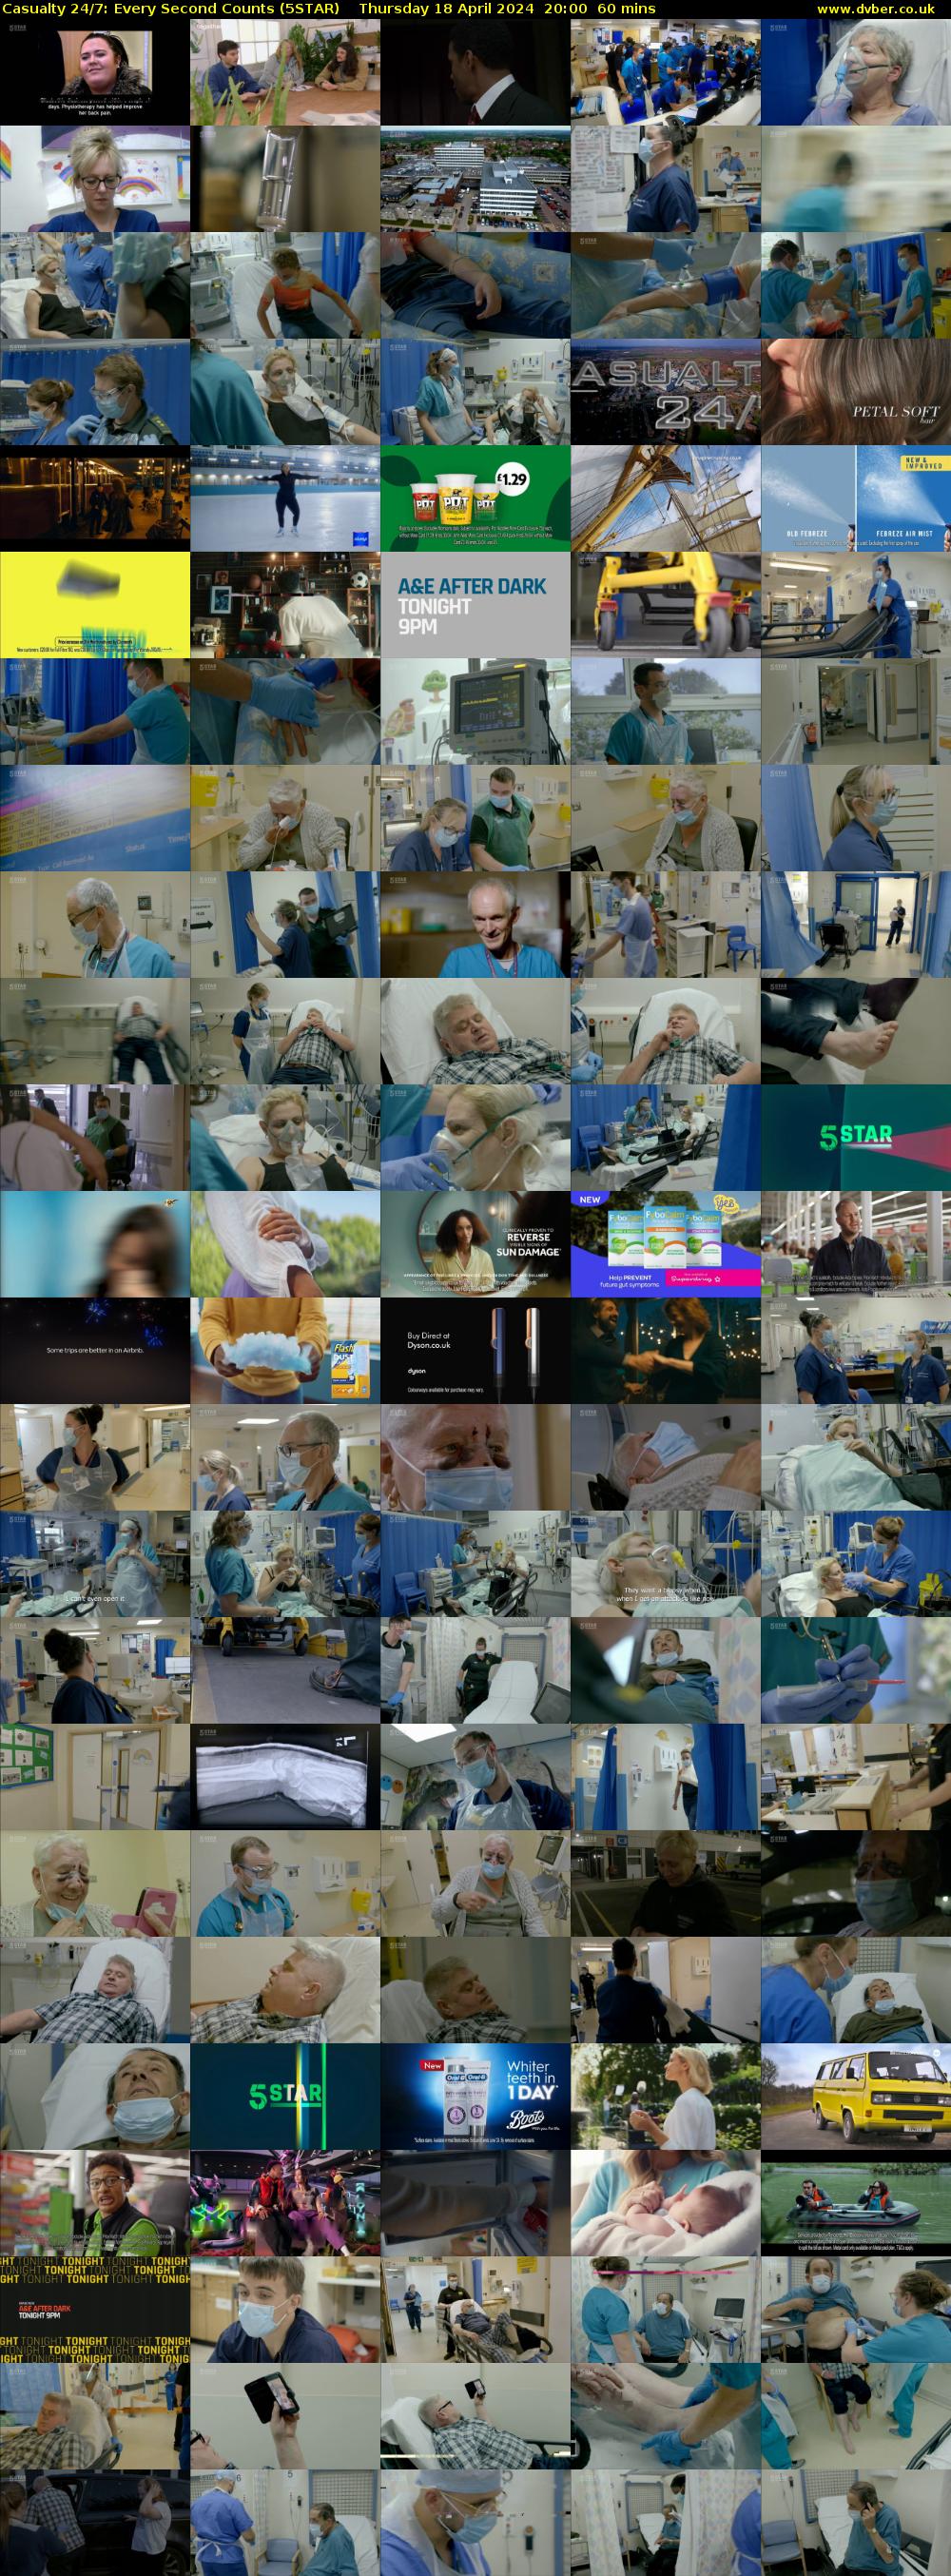 Casualty 24/7: Every Second Counts (5STAR) Thursday 18 April 2024 20:00 - 21:00